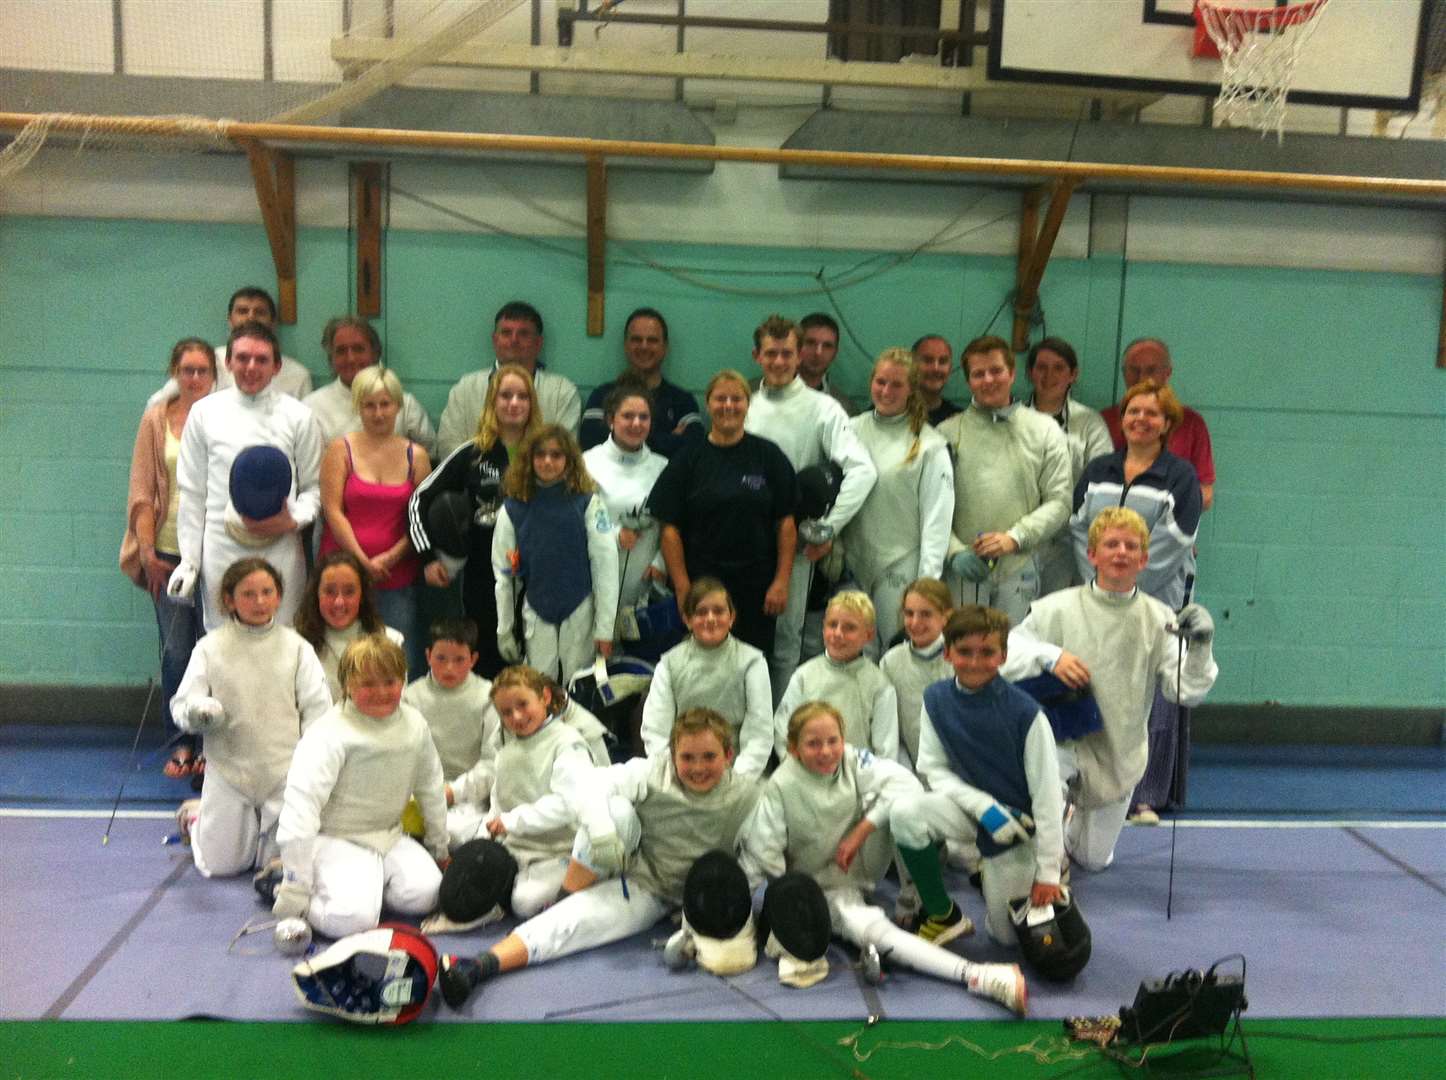 Members of the Invicta Fencing Club at Sandwich with their new equipment paid for with the help of a £10,000 grant